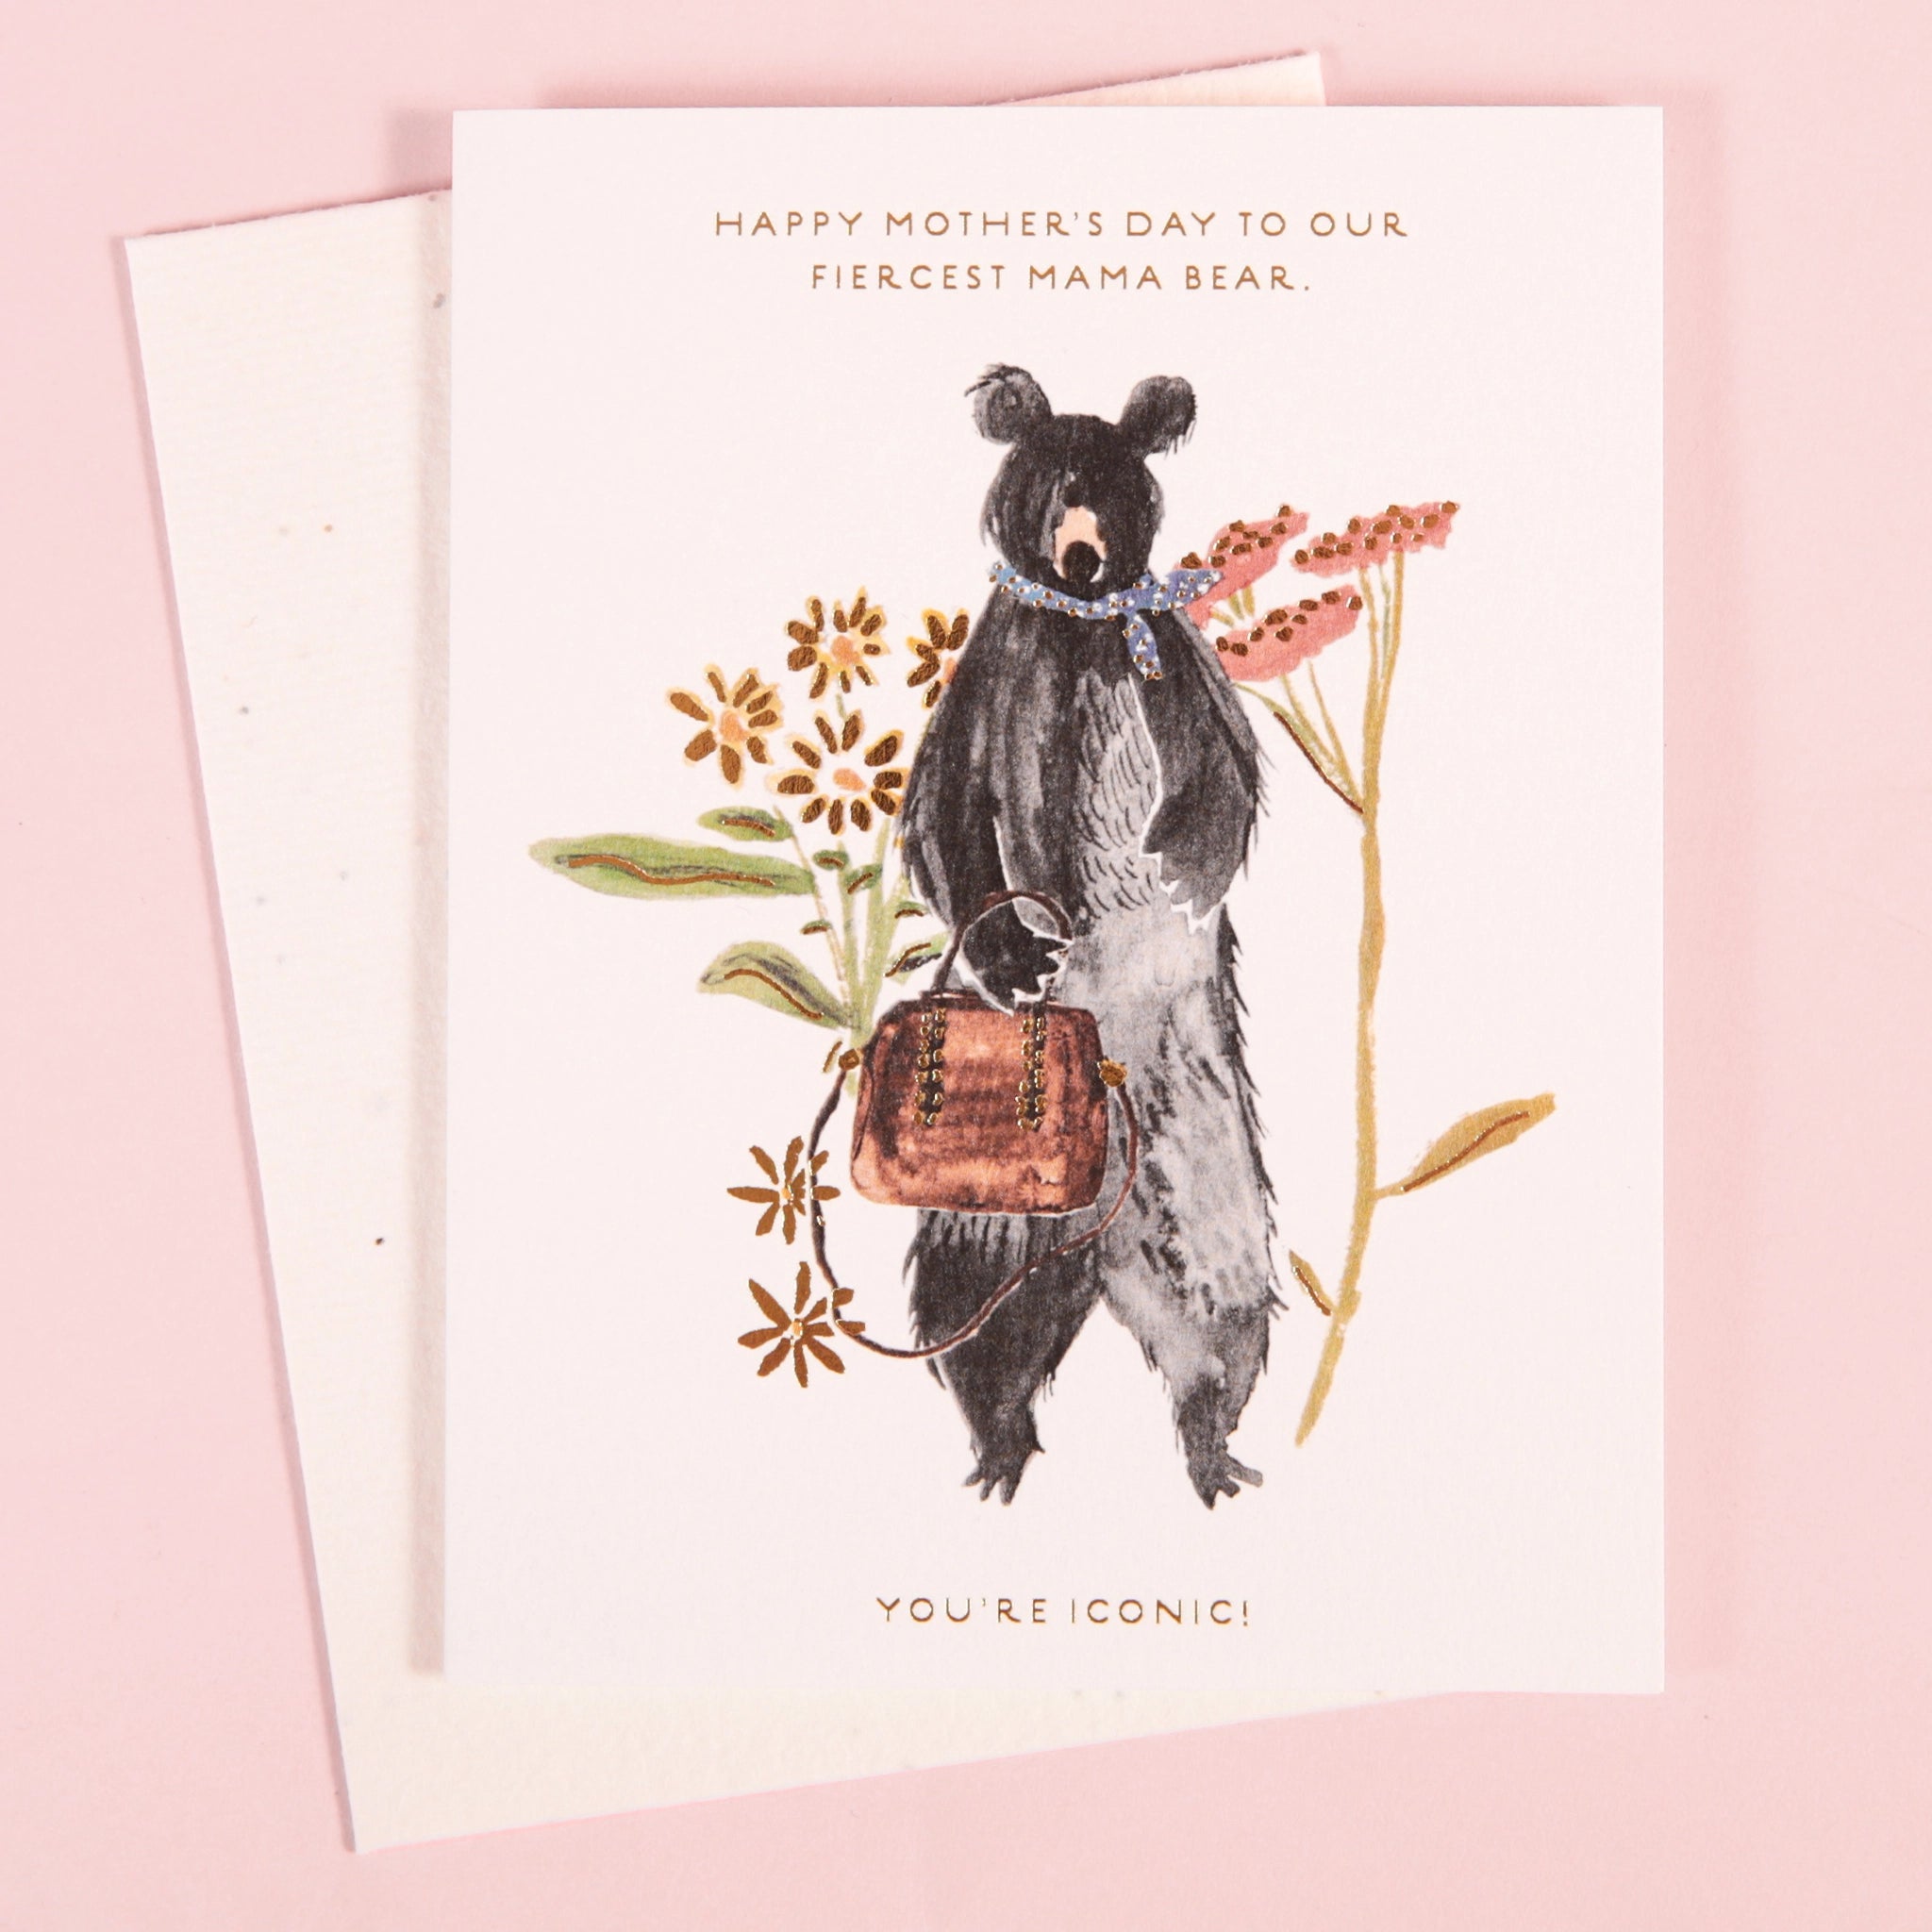 On a light pink background is a white card and envelope with an illustration of a black bear standing up on its hind legs while holding a brown purse in front of various flowers and text on the top that reads, &quot;Happy Mother&#39;s Day to our fiercest mama bear&quot;.